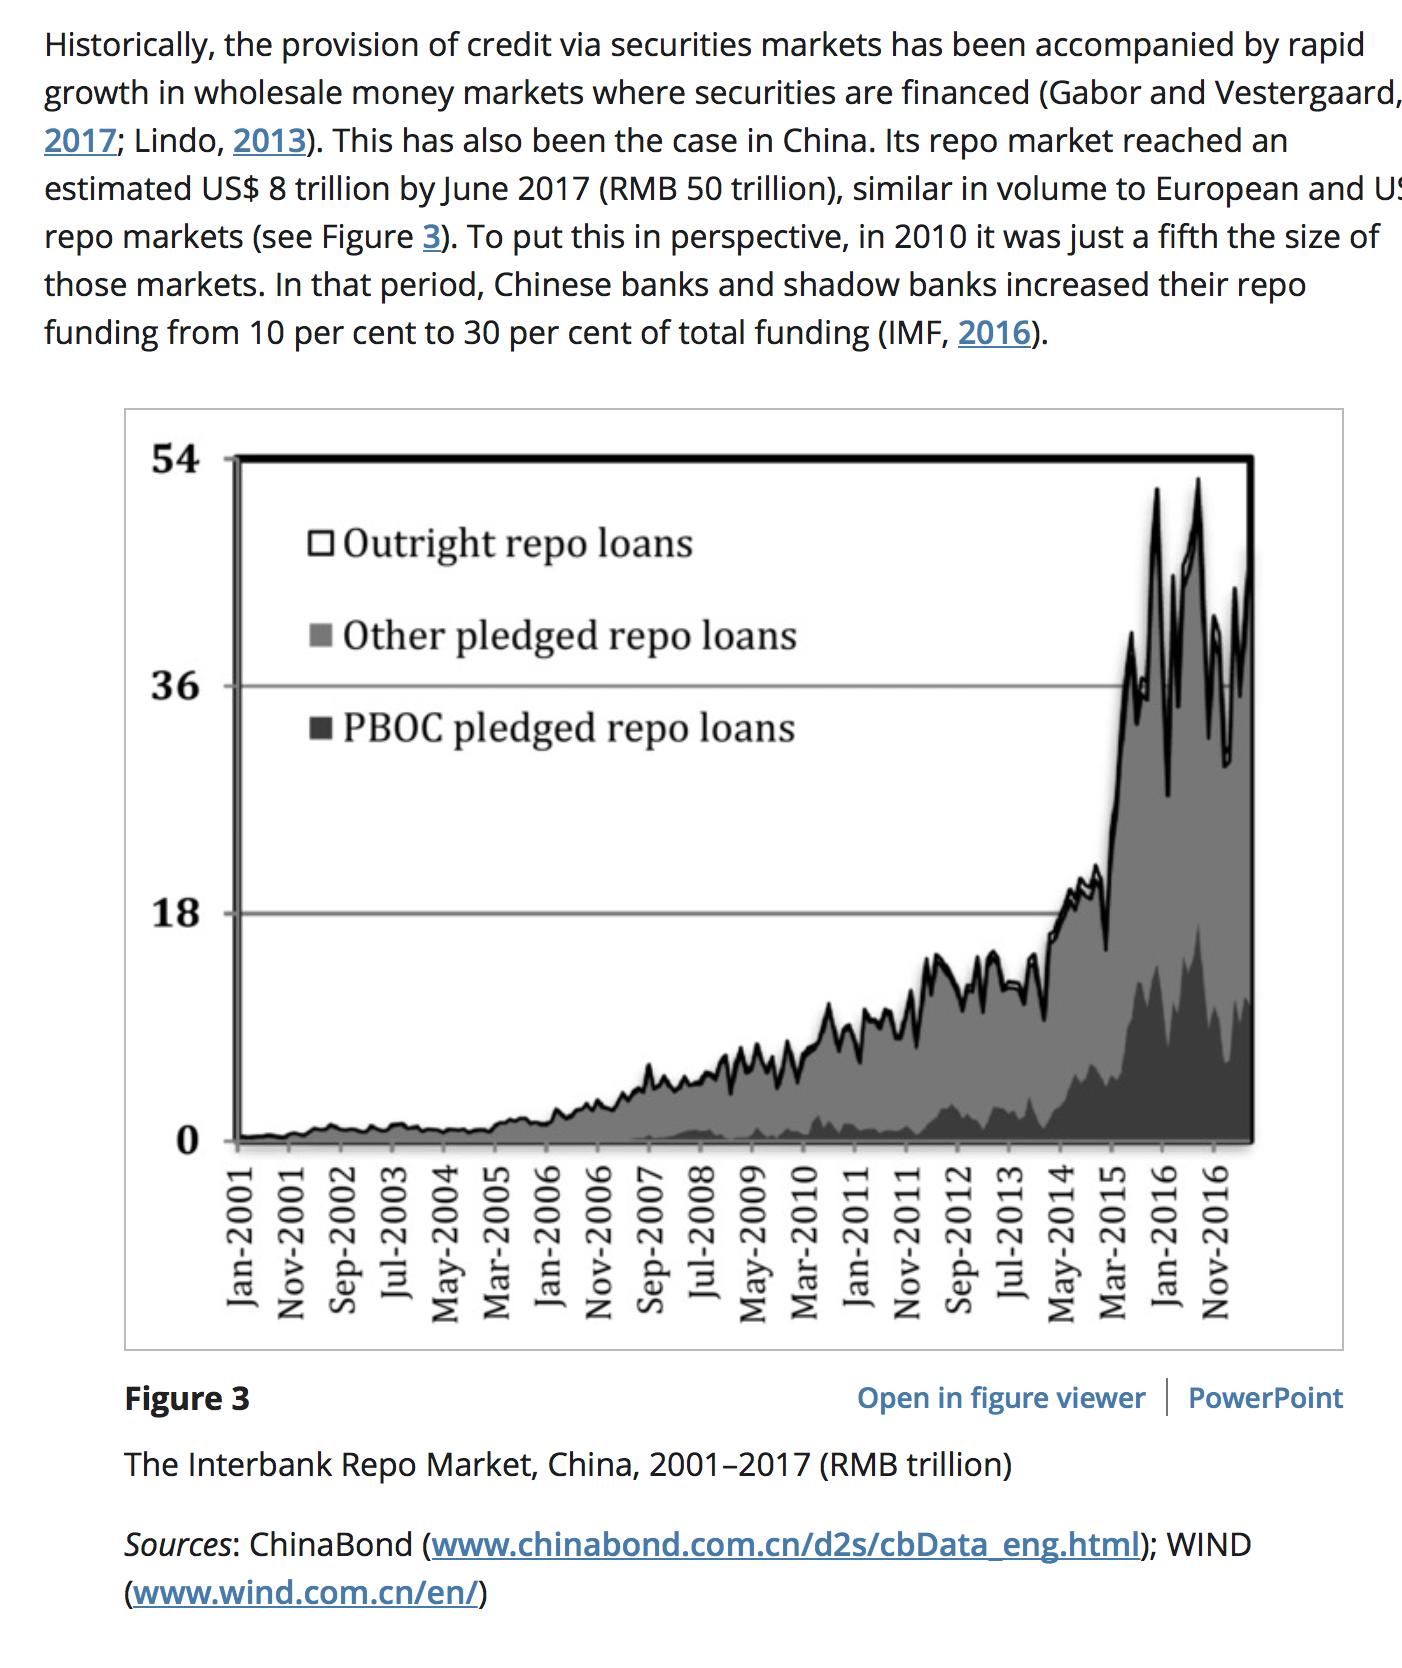 midlertidig Ray uddanne Thread Reader App on Twitter: "@NualphaOmegam Hello there is your unroll:  Thread by @DanielaGabor: "China gets increasingly plugged into global  financial cycle - the biggest change in global capital markets in anyone's